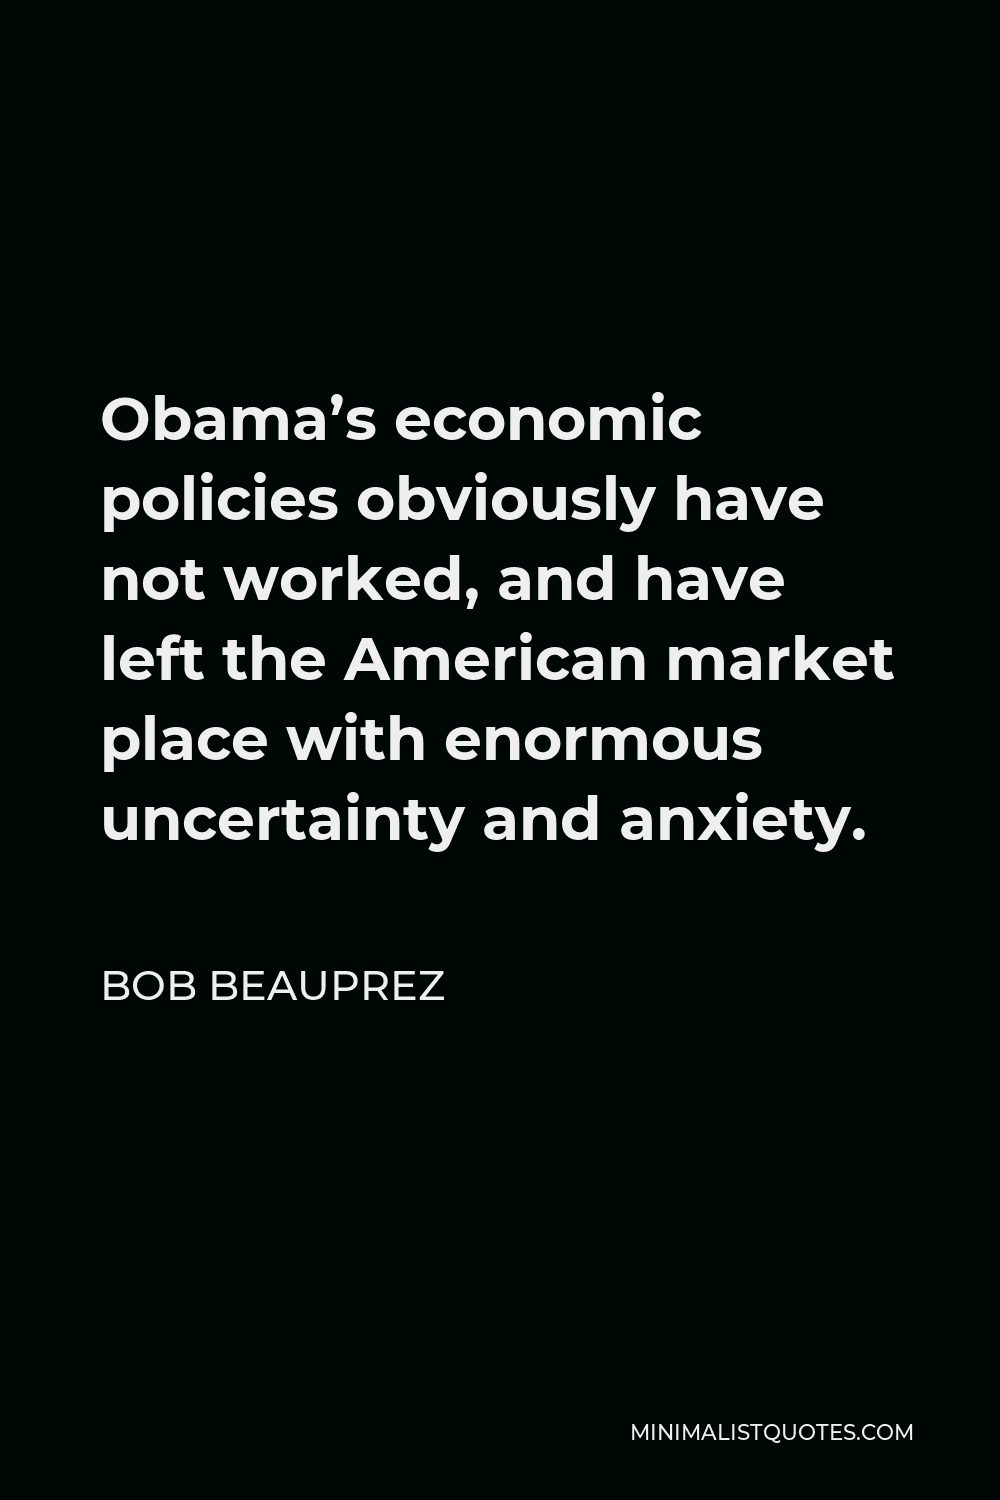 Bob Beauprez Quote - Obama’s economic policies obviously have not worked, and have left the American market place with enormous uncertainty and anxiety.